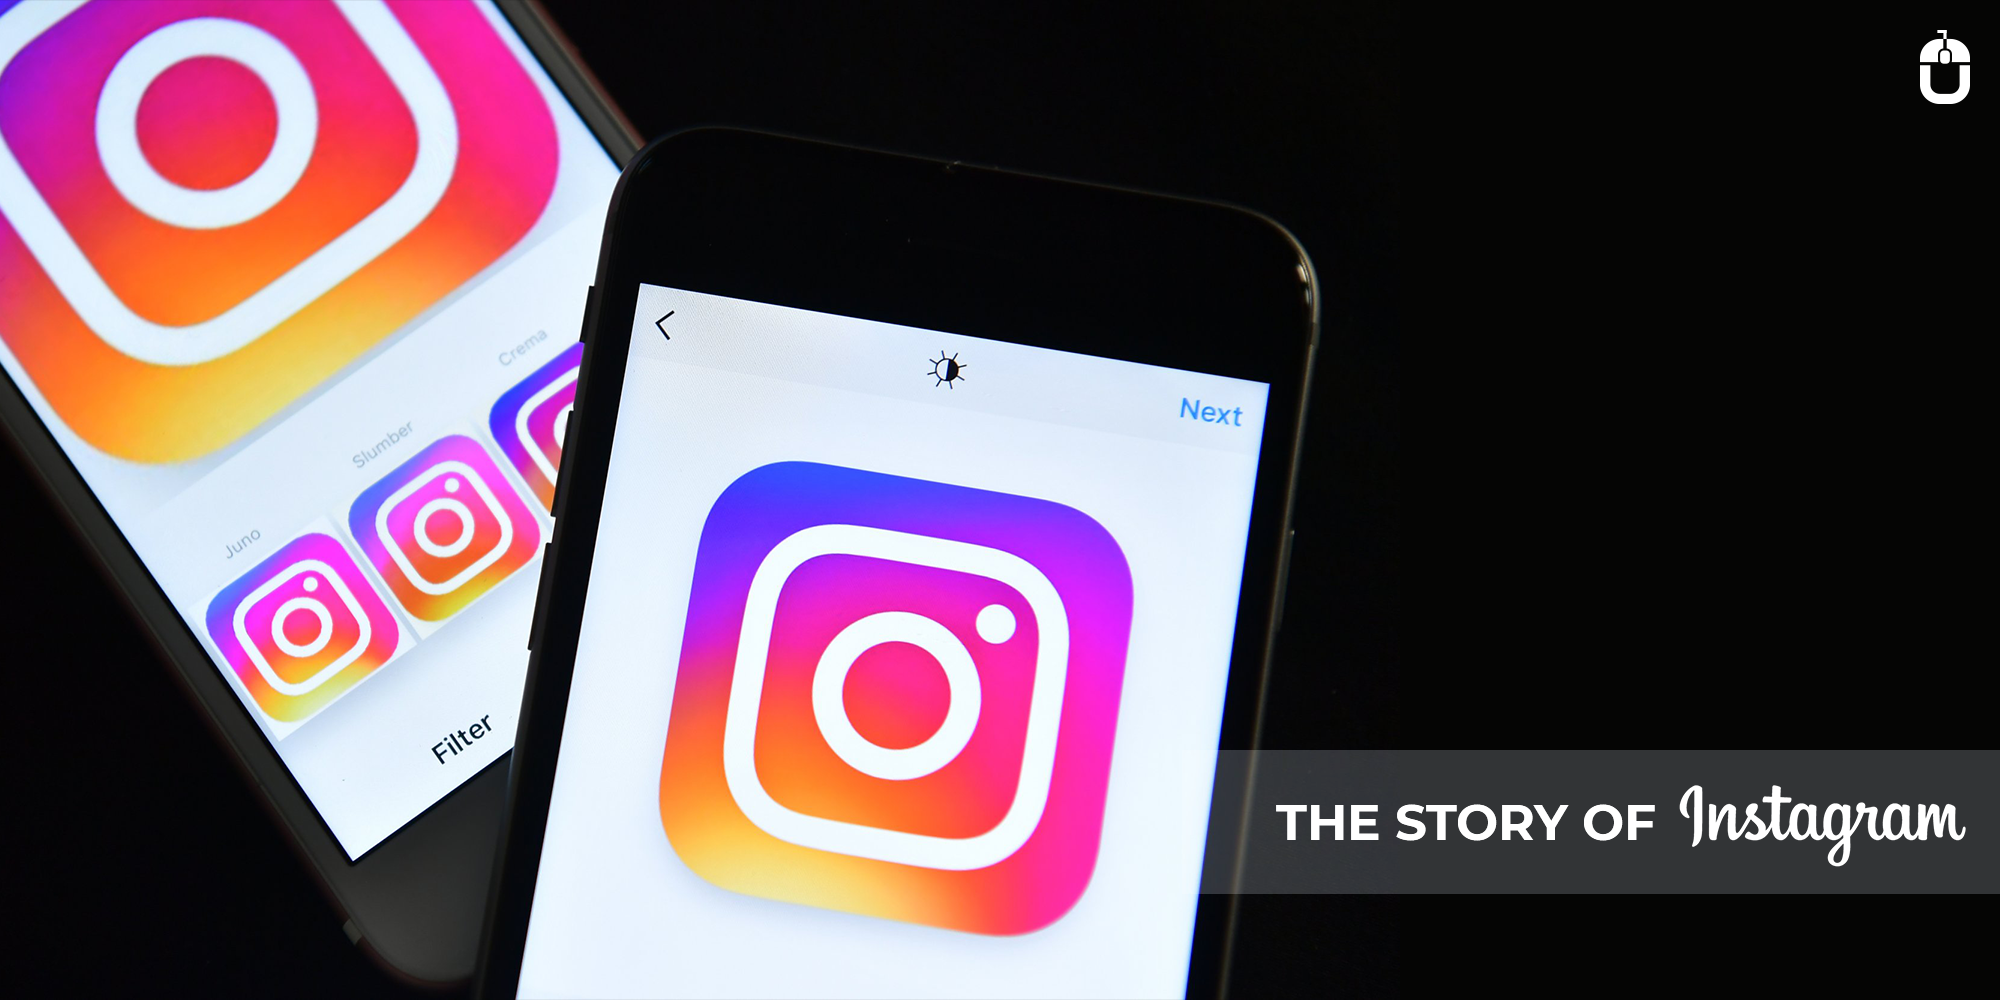 The Story Of Instagram – A Camera App Turned Into The Second Most Important Social Network